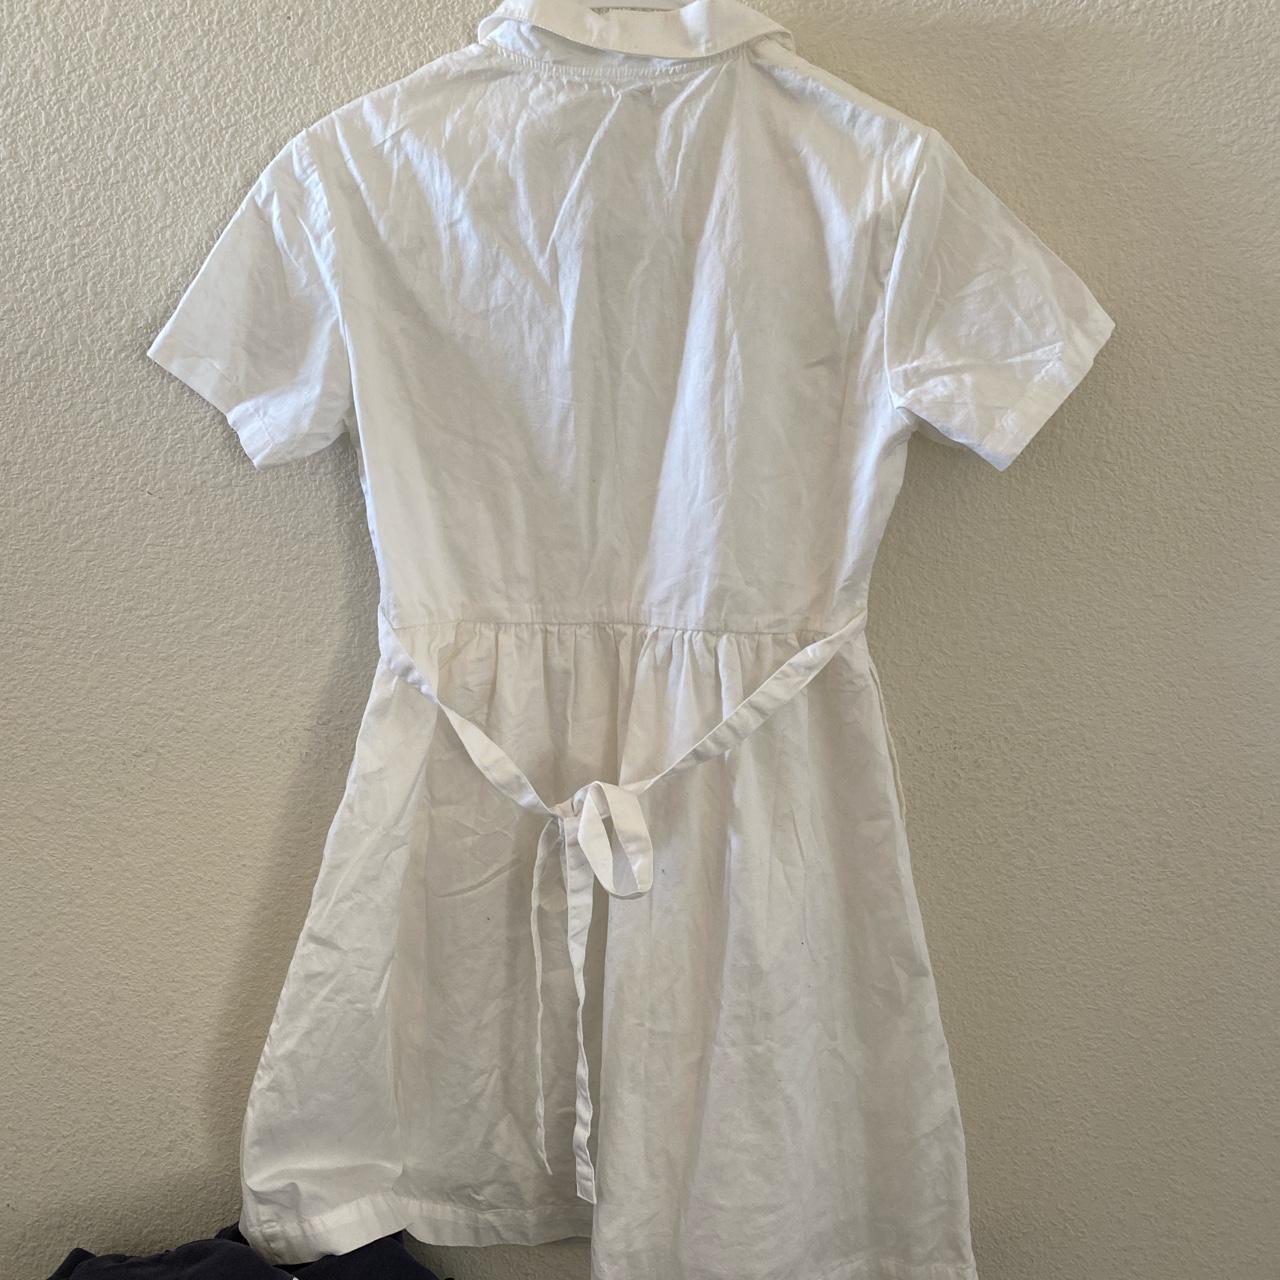 Brandy melville button down Gianna dress, There is a